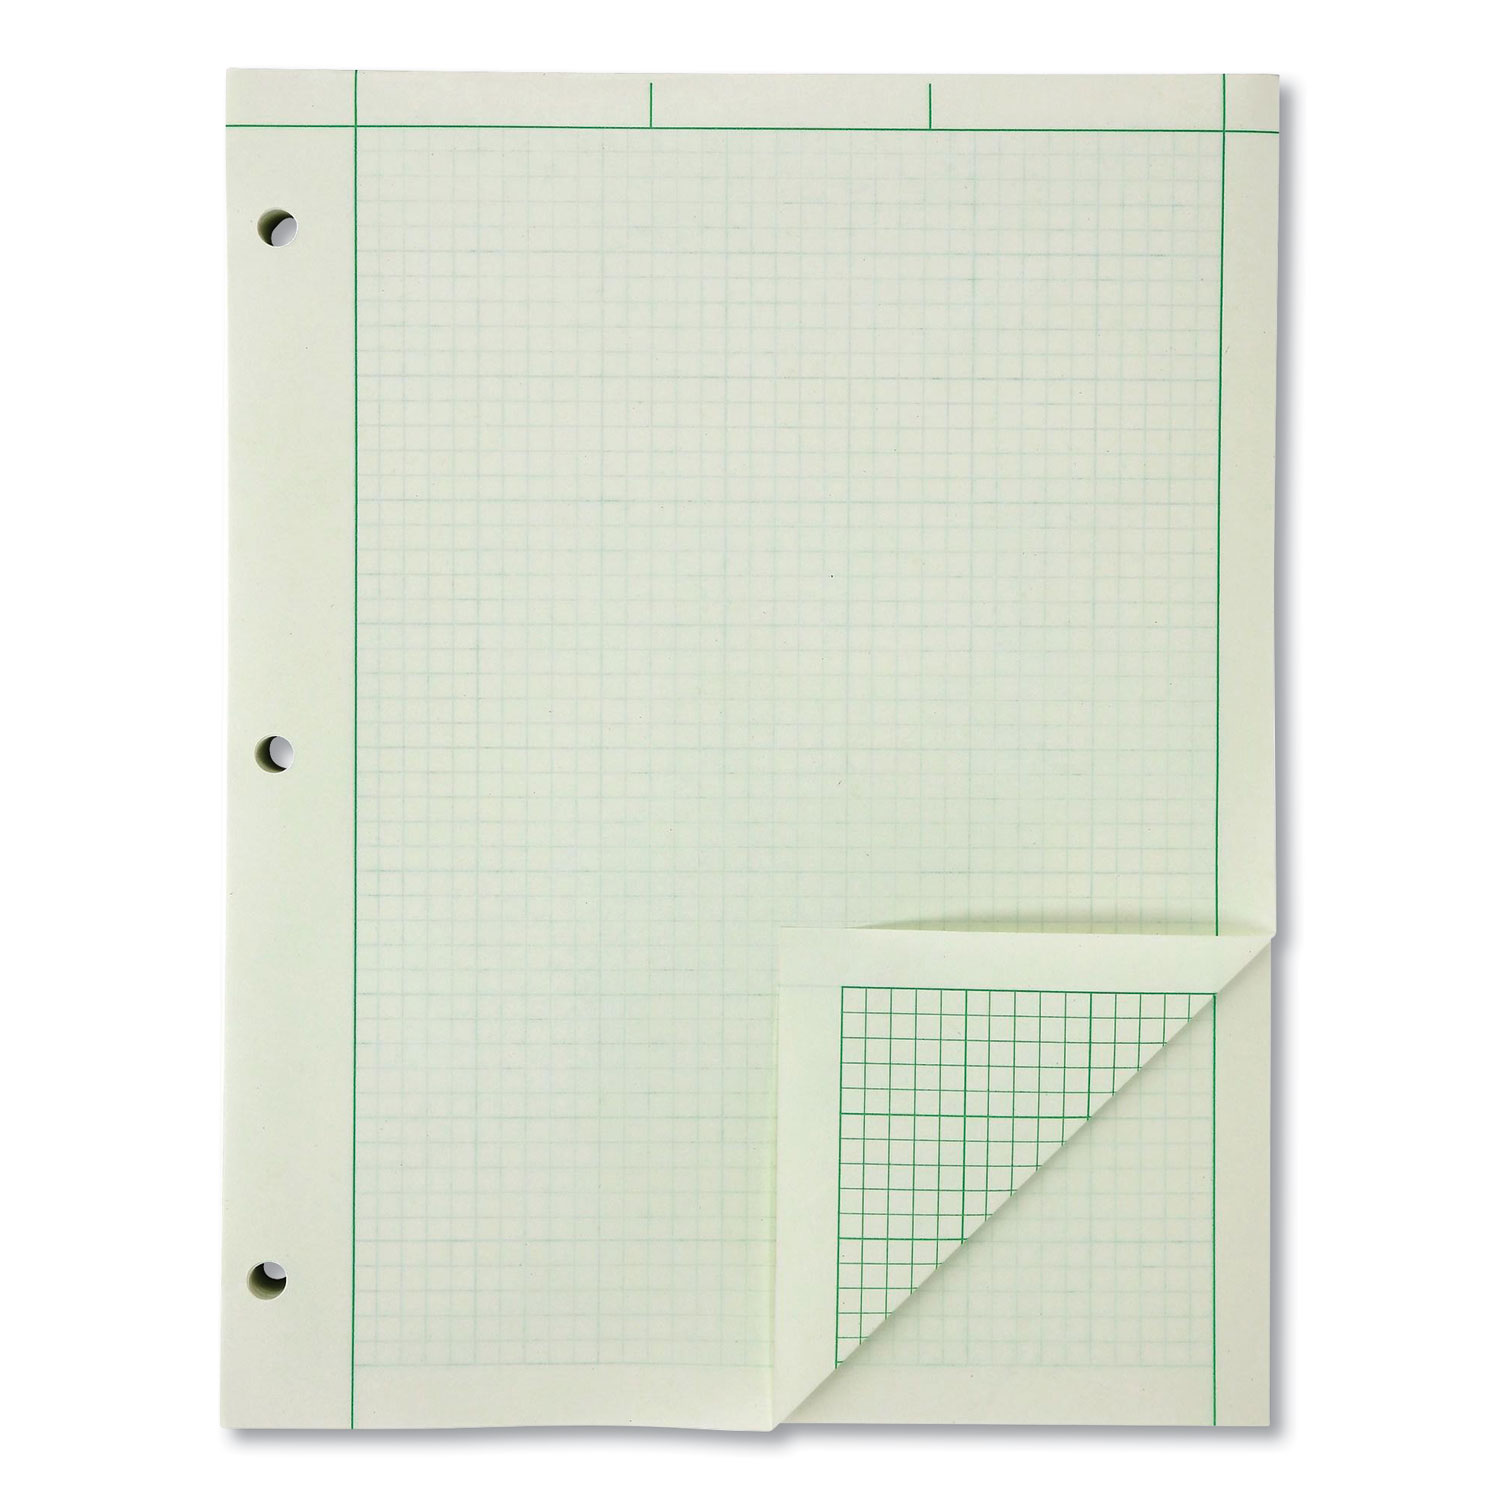  Ampad 22-144 Evidence Engineer's Computation Pad, 5 sq/in Quadrille Rule, 8.5 x 11, Green Tint, 200 Sheets/Pad (AMP491447) 